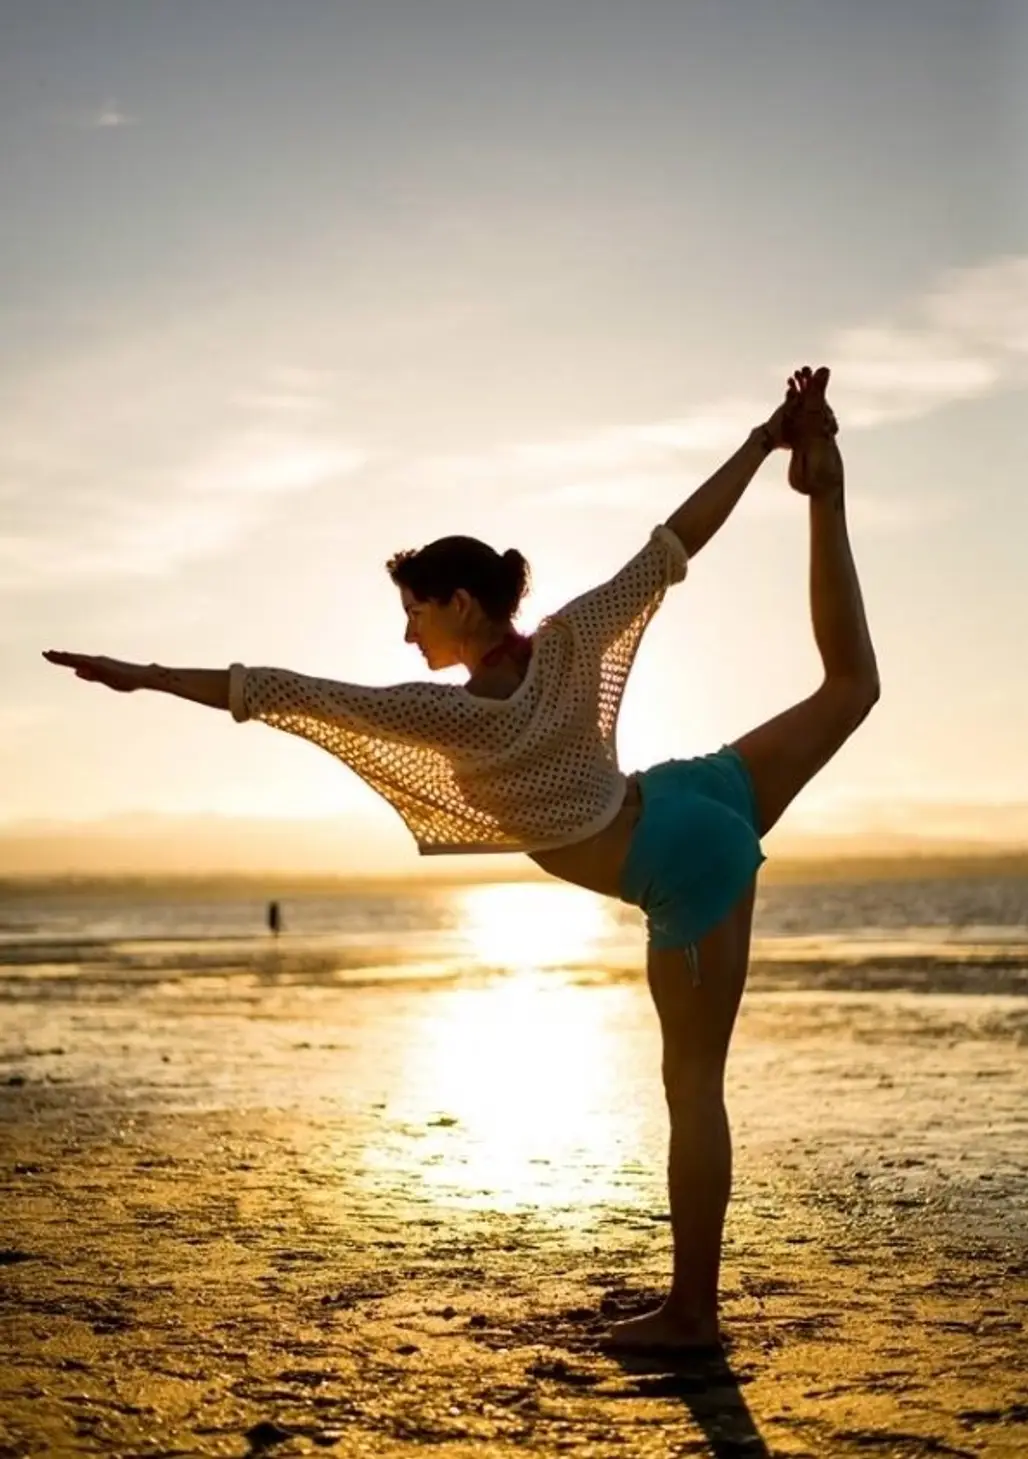 7 Yoga Poses for Balance That You've Got to Try